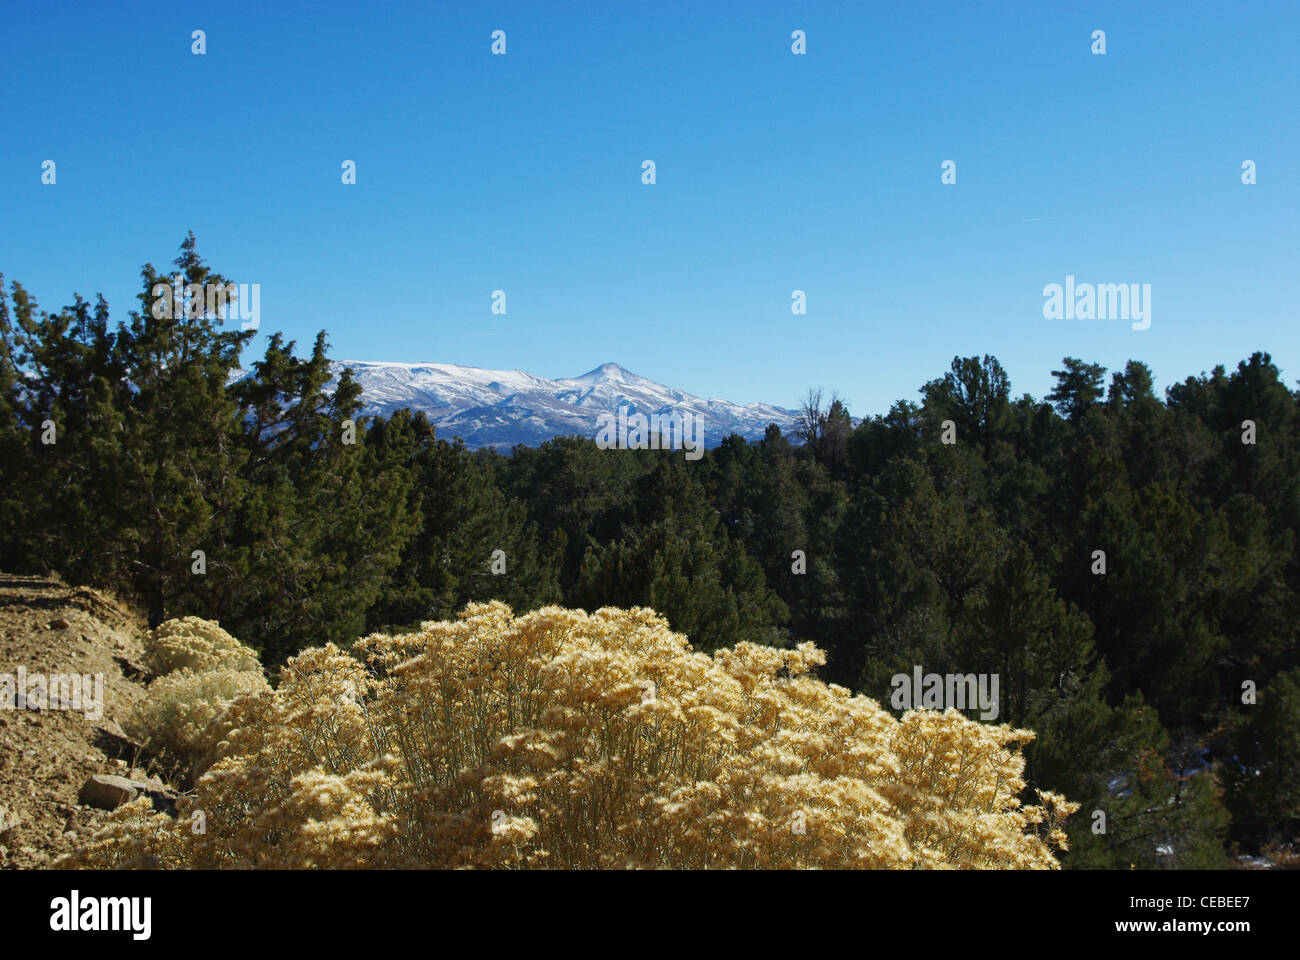 High desert flowers, trees and snowy mountains of Humboldt Toiyabe National Forest, Nevada Stock Photo